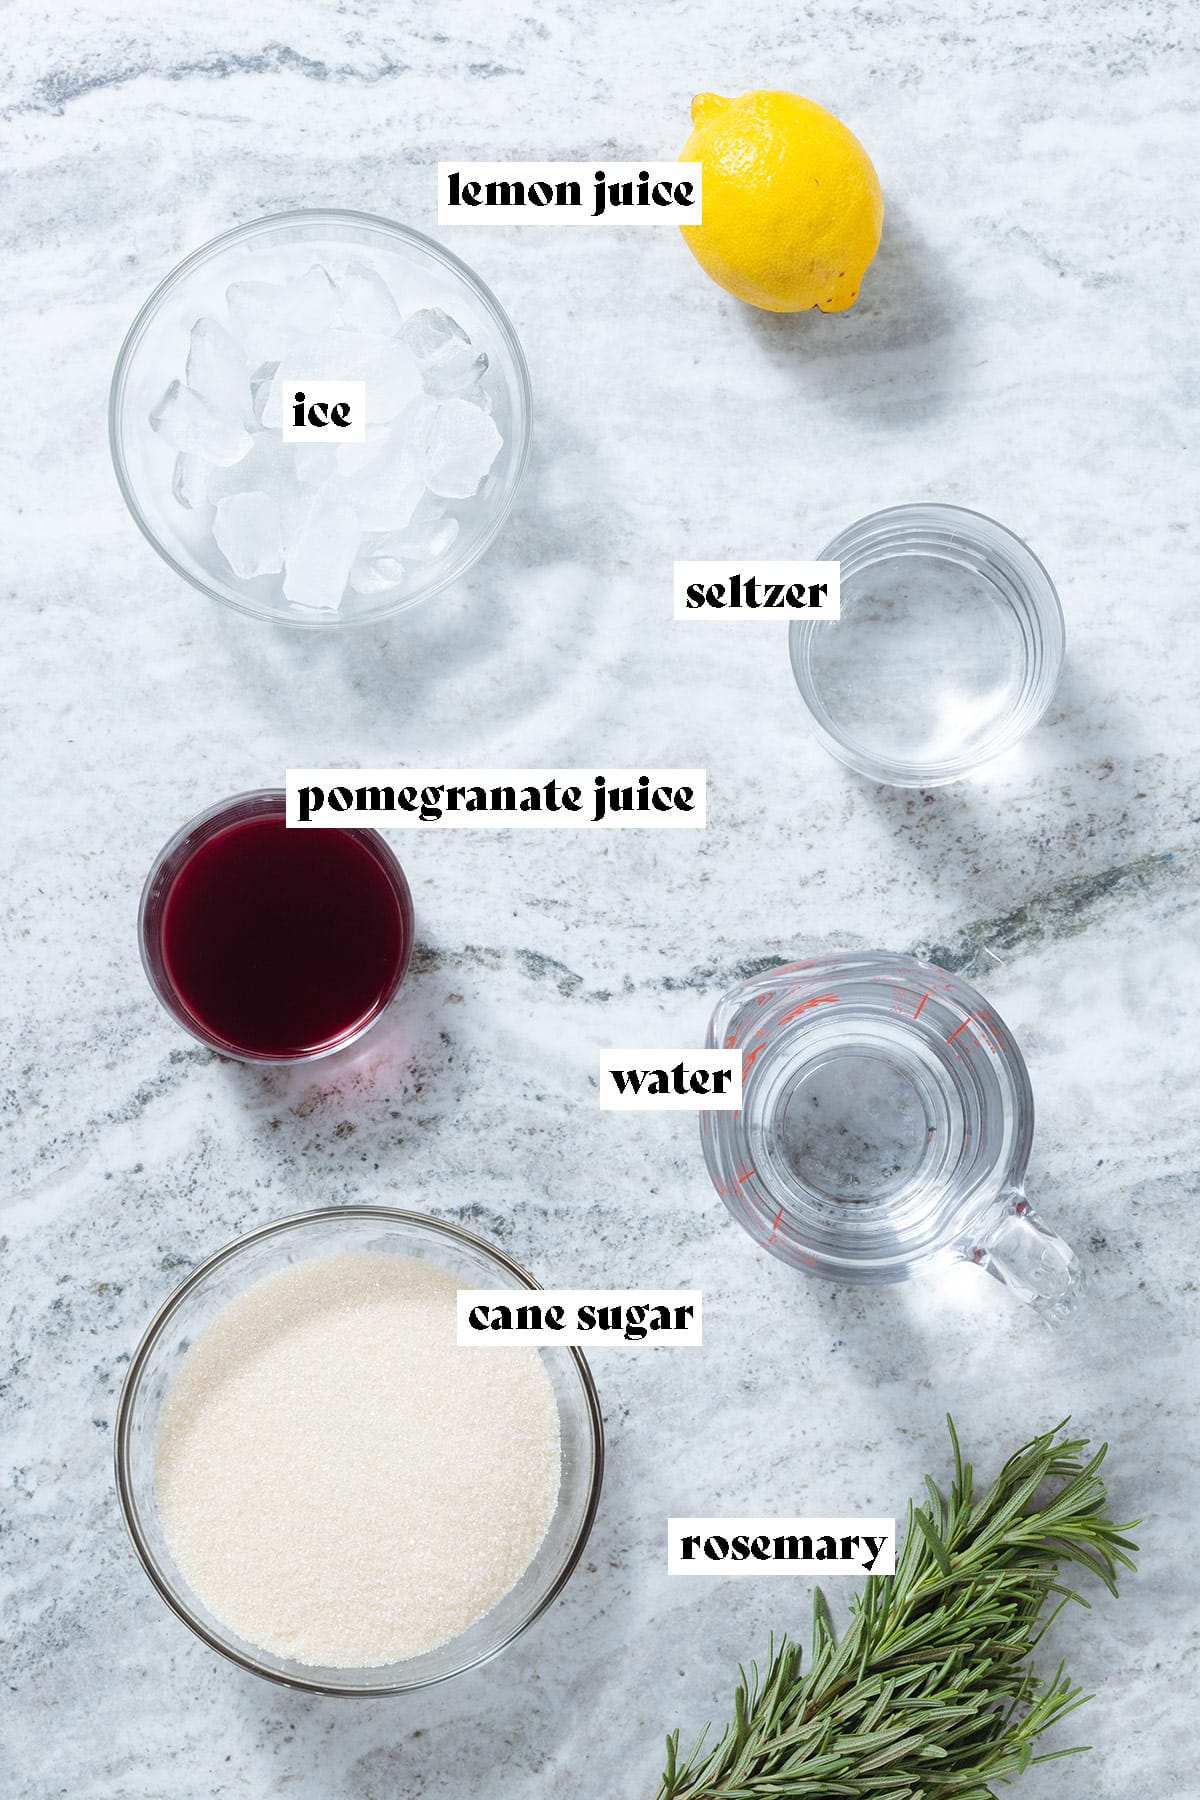 Rosemary, pomegranate juice, cane sugar, lemon, water, and seltzer laid out on a grey stone background with text overlay.